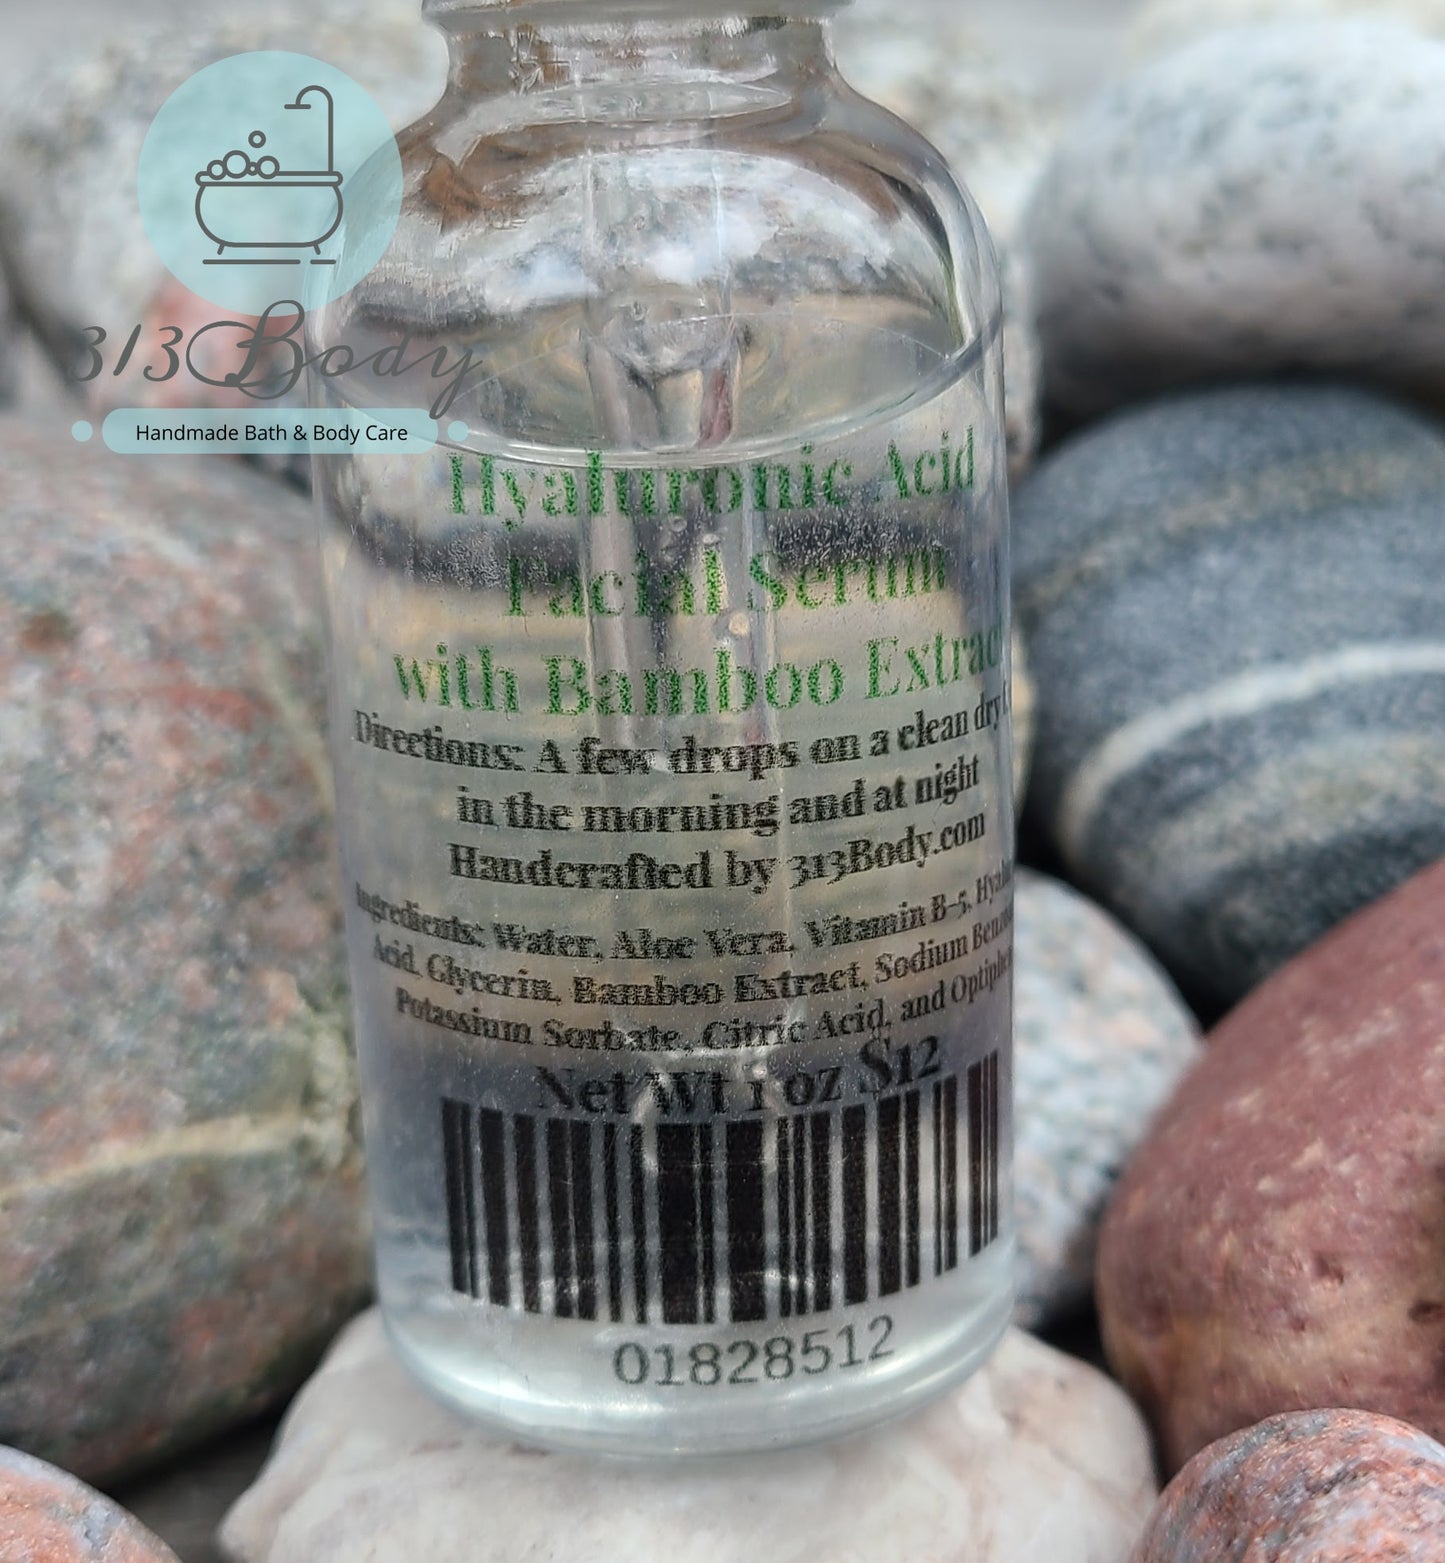 Hyaluronic Acid Serum with Bamboo Extract